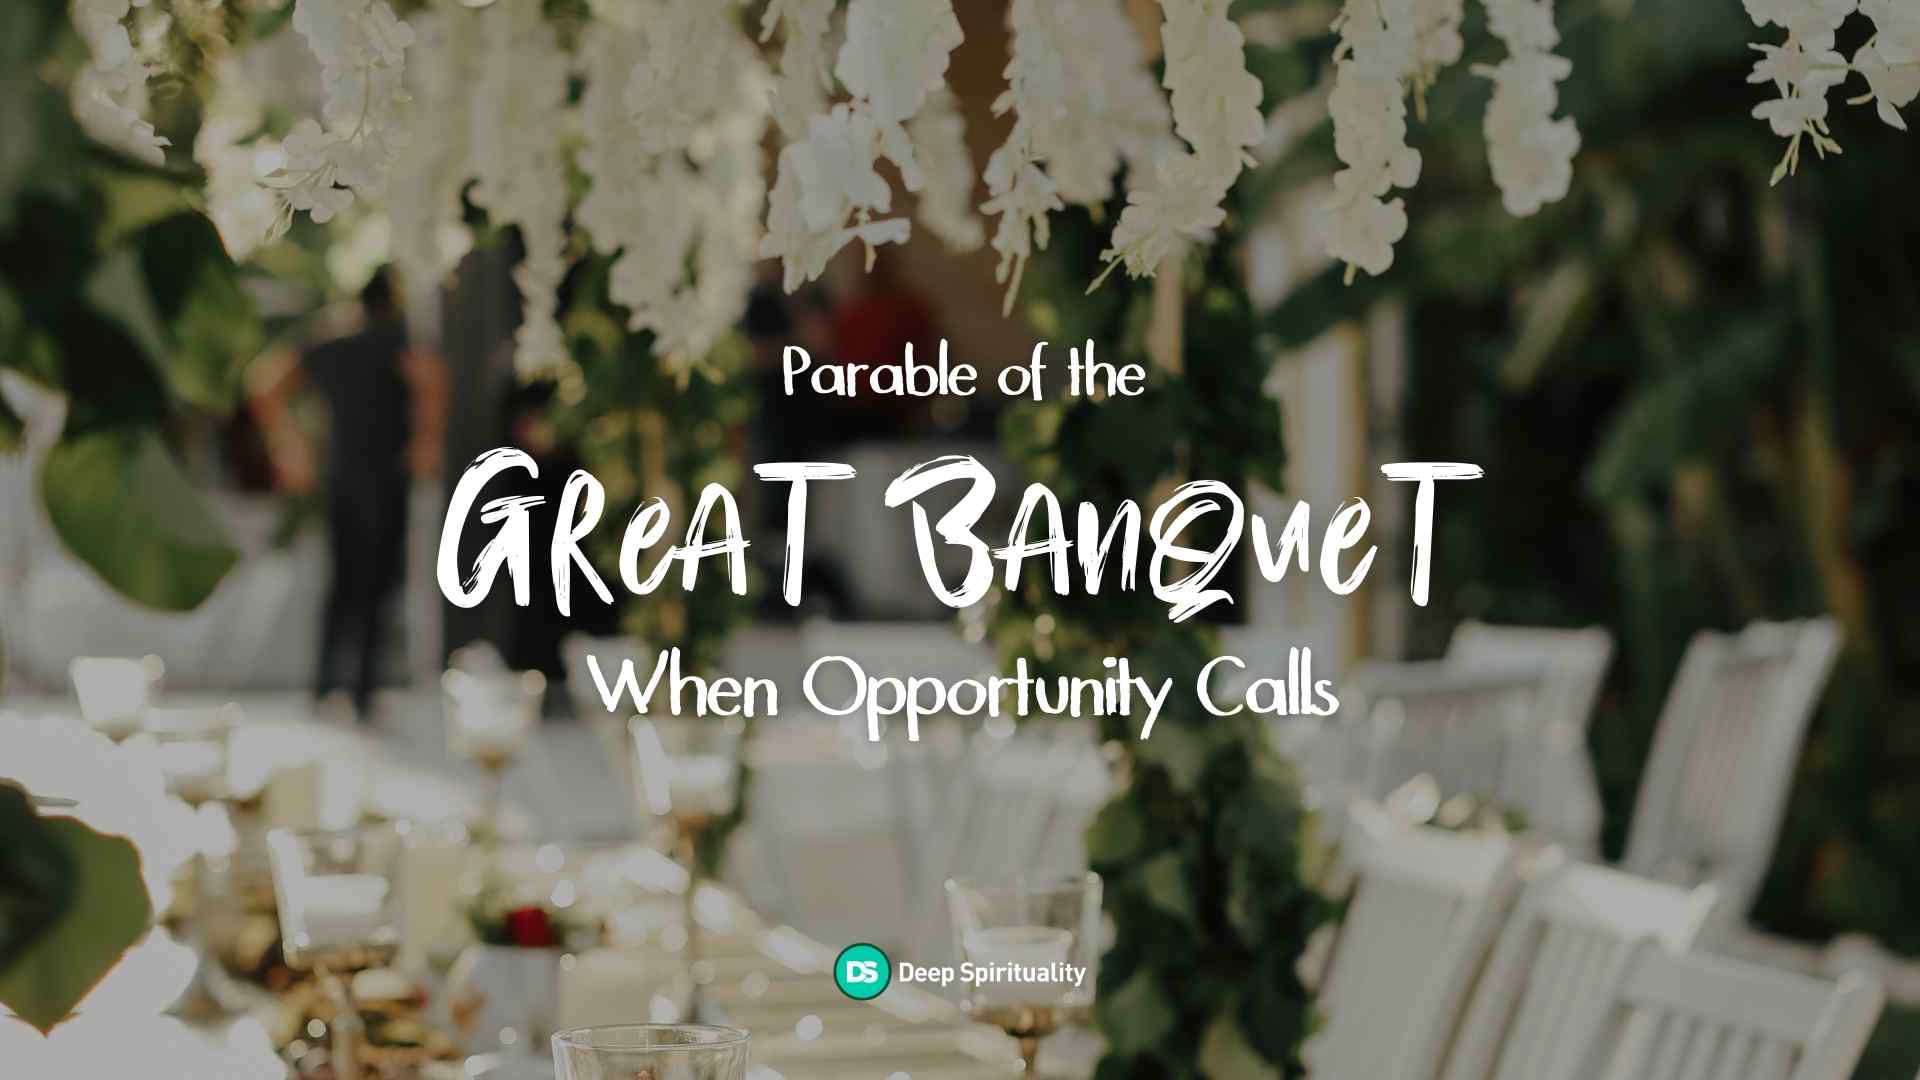 Parable of the Great Banquet: When Opportunity Calls 49